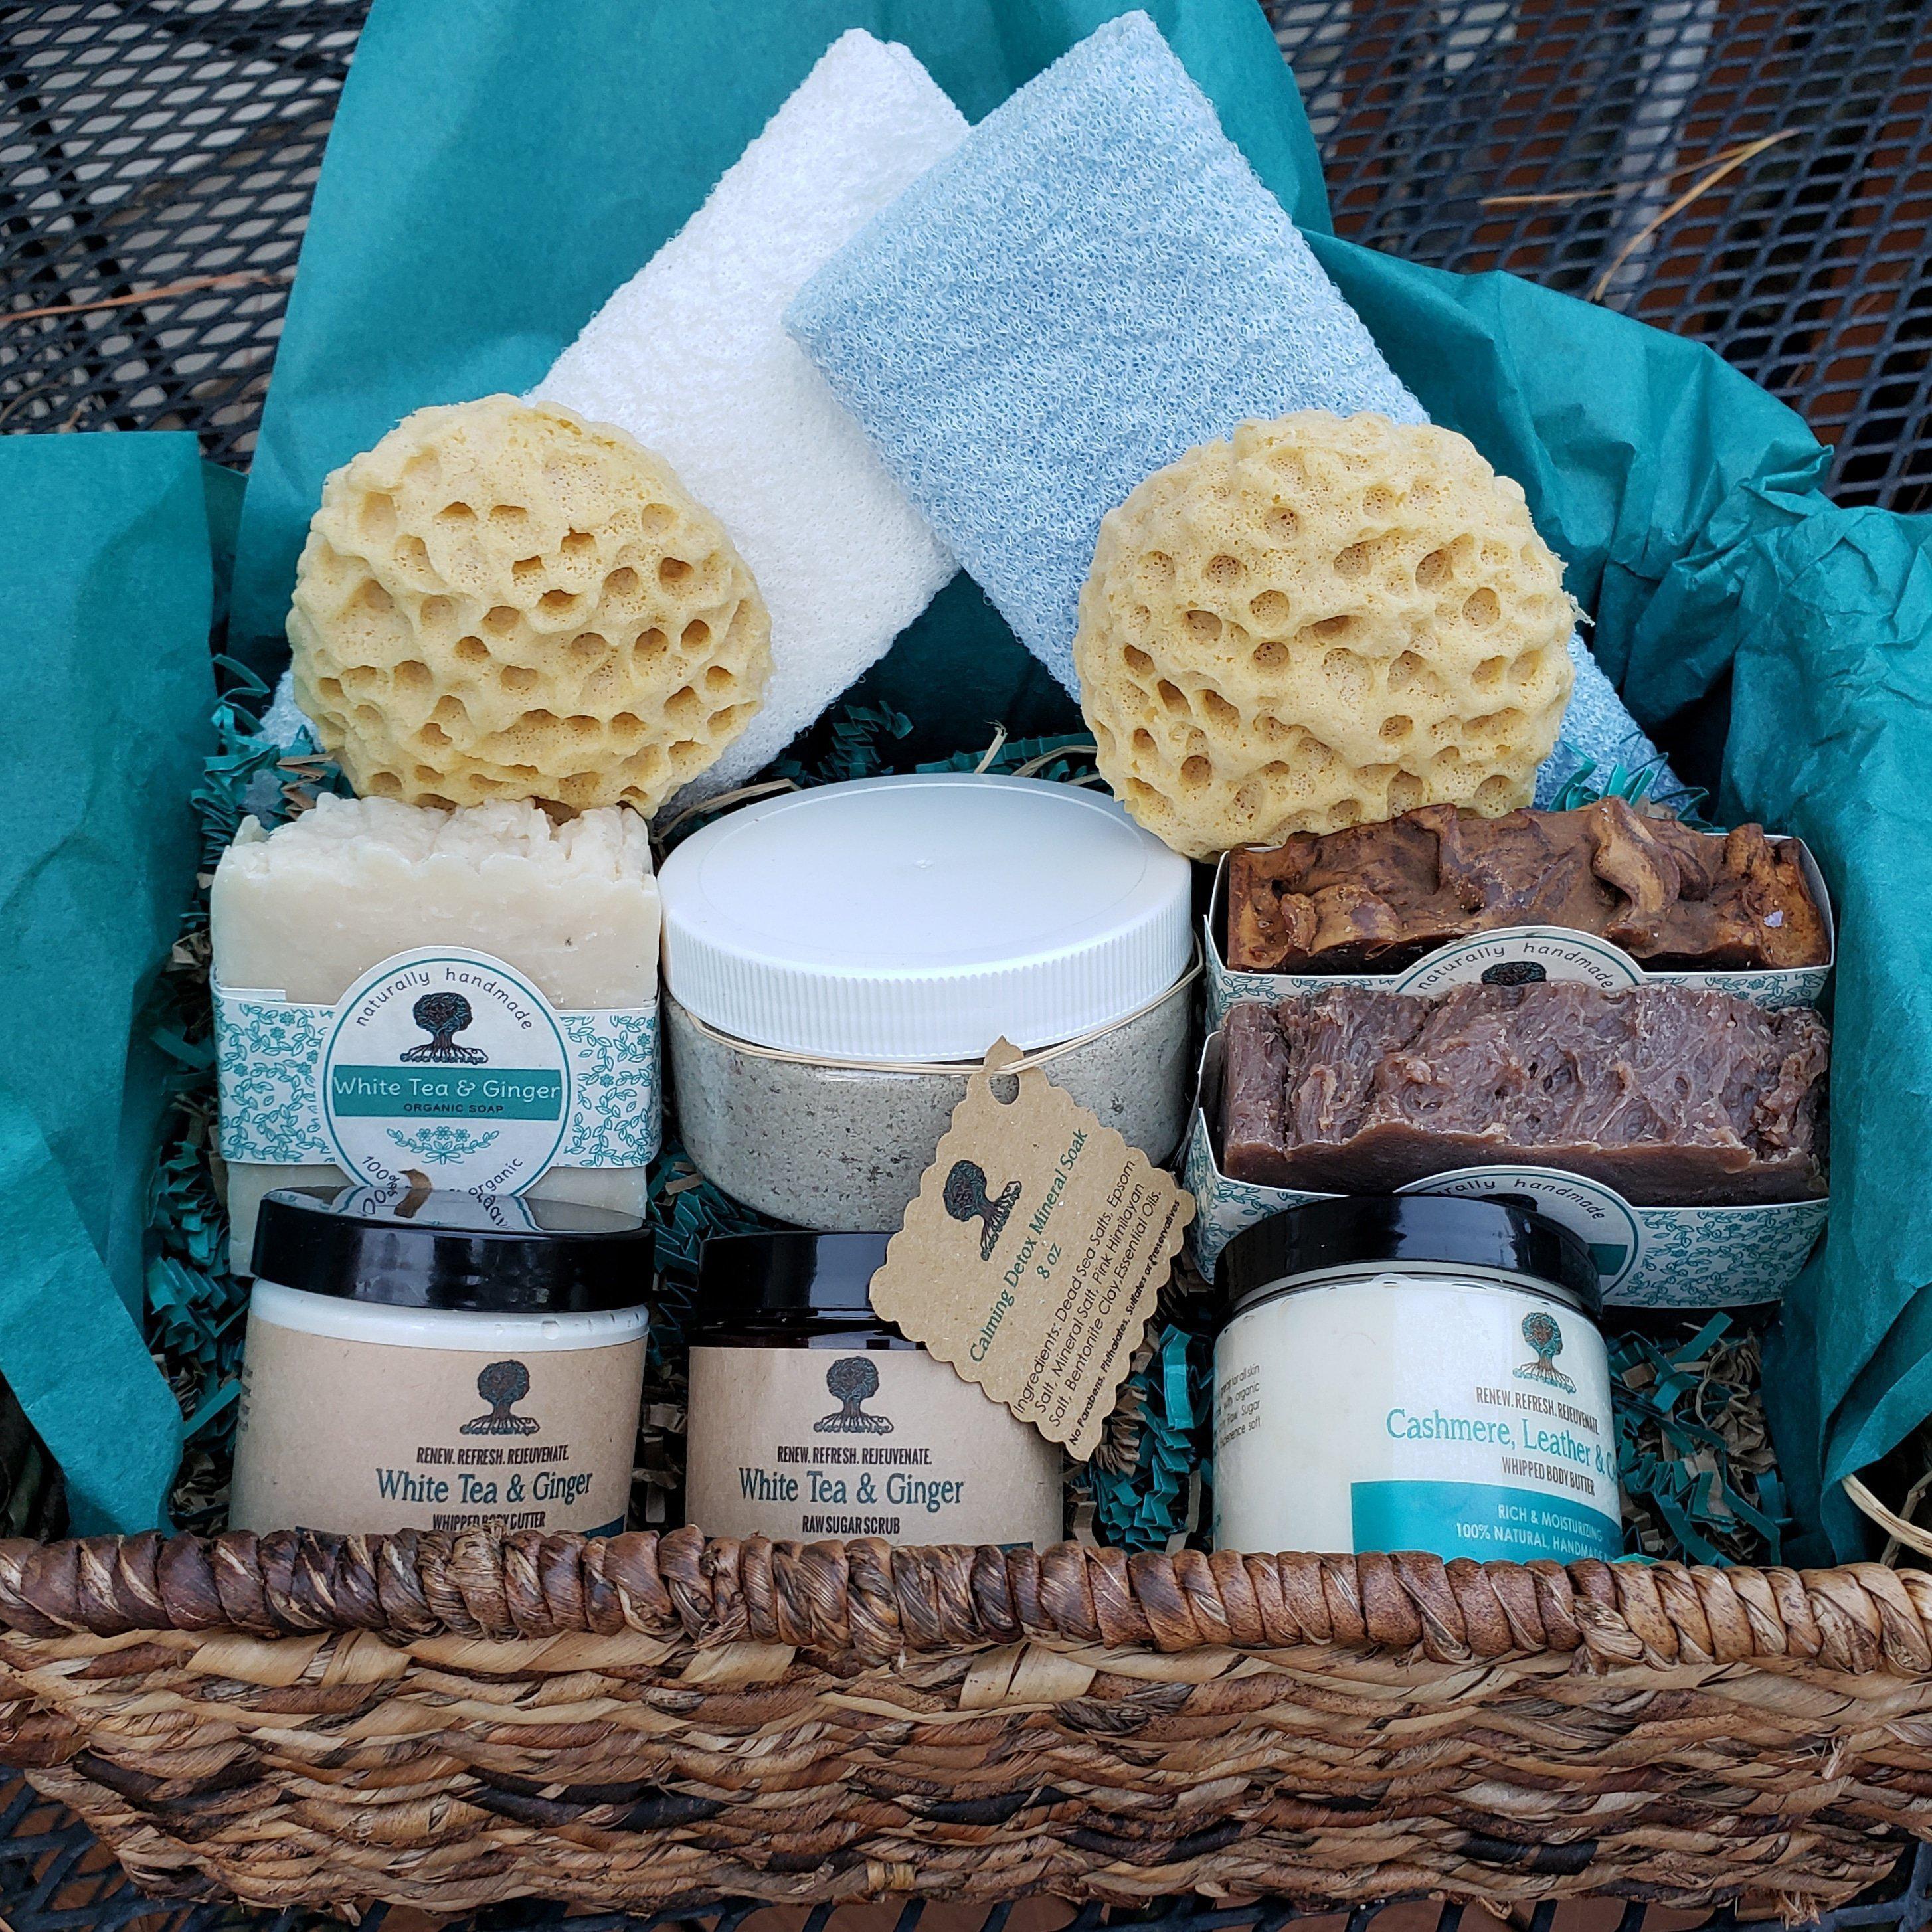 His & Hers Spa Gift Basket